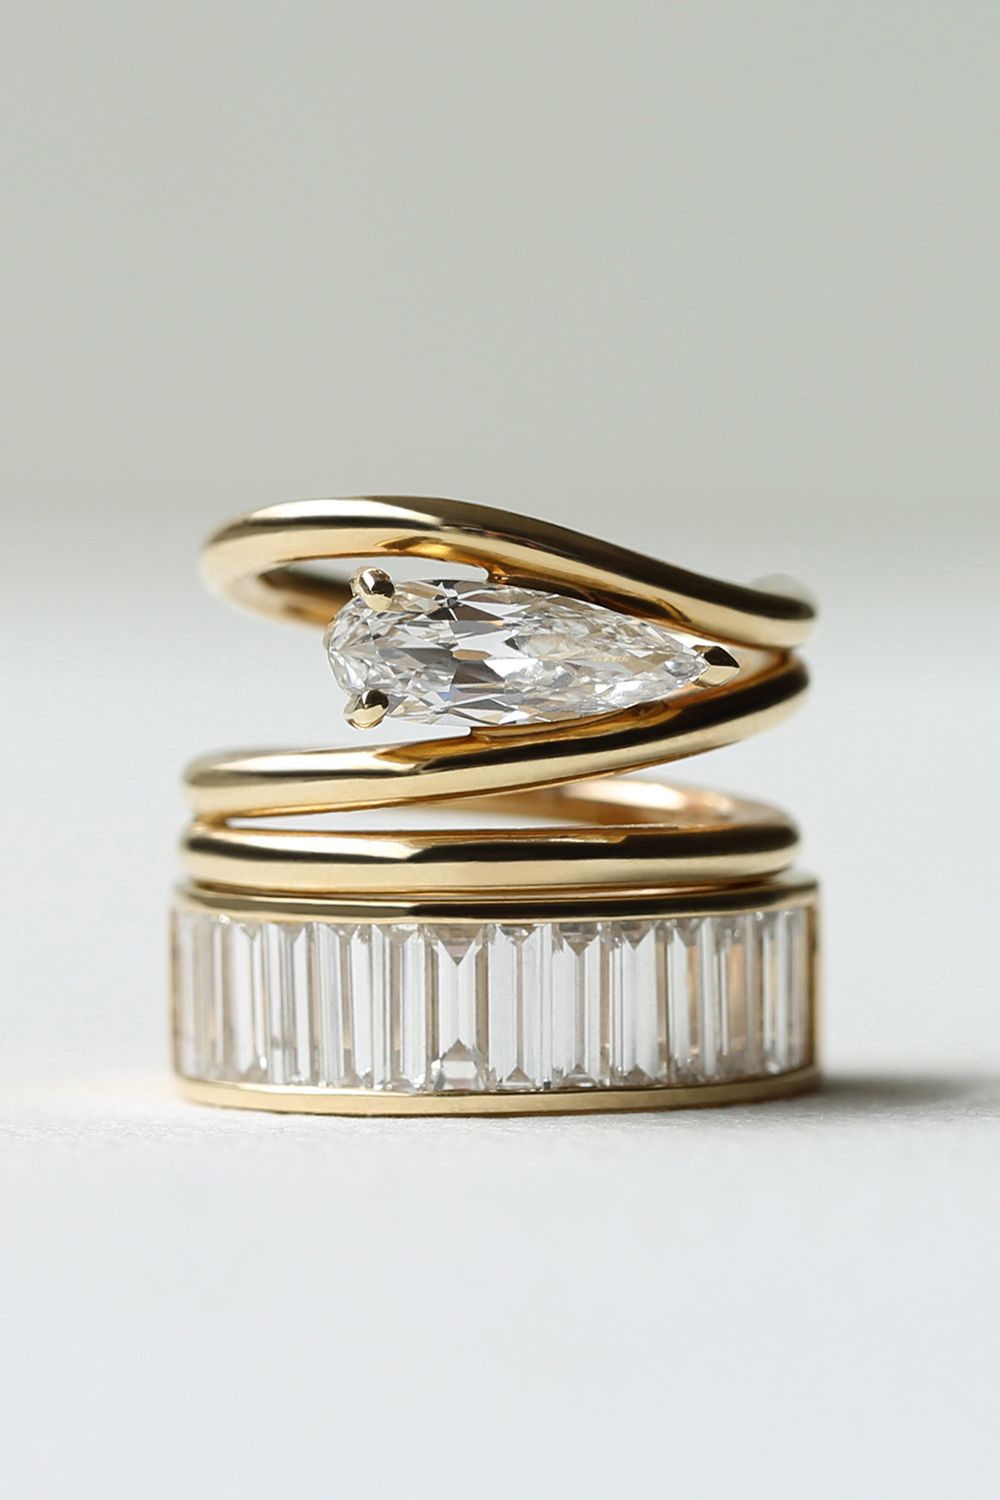 The Ultimate Guide to Designing Custom
Engagement Rings